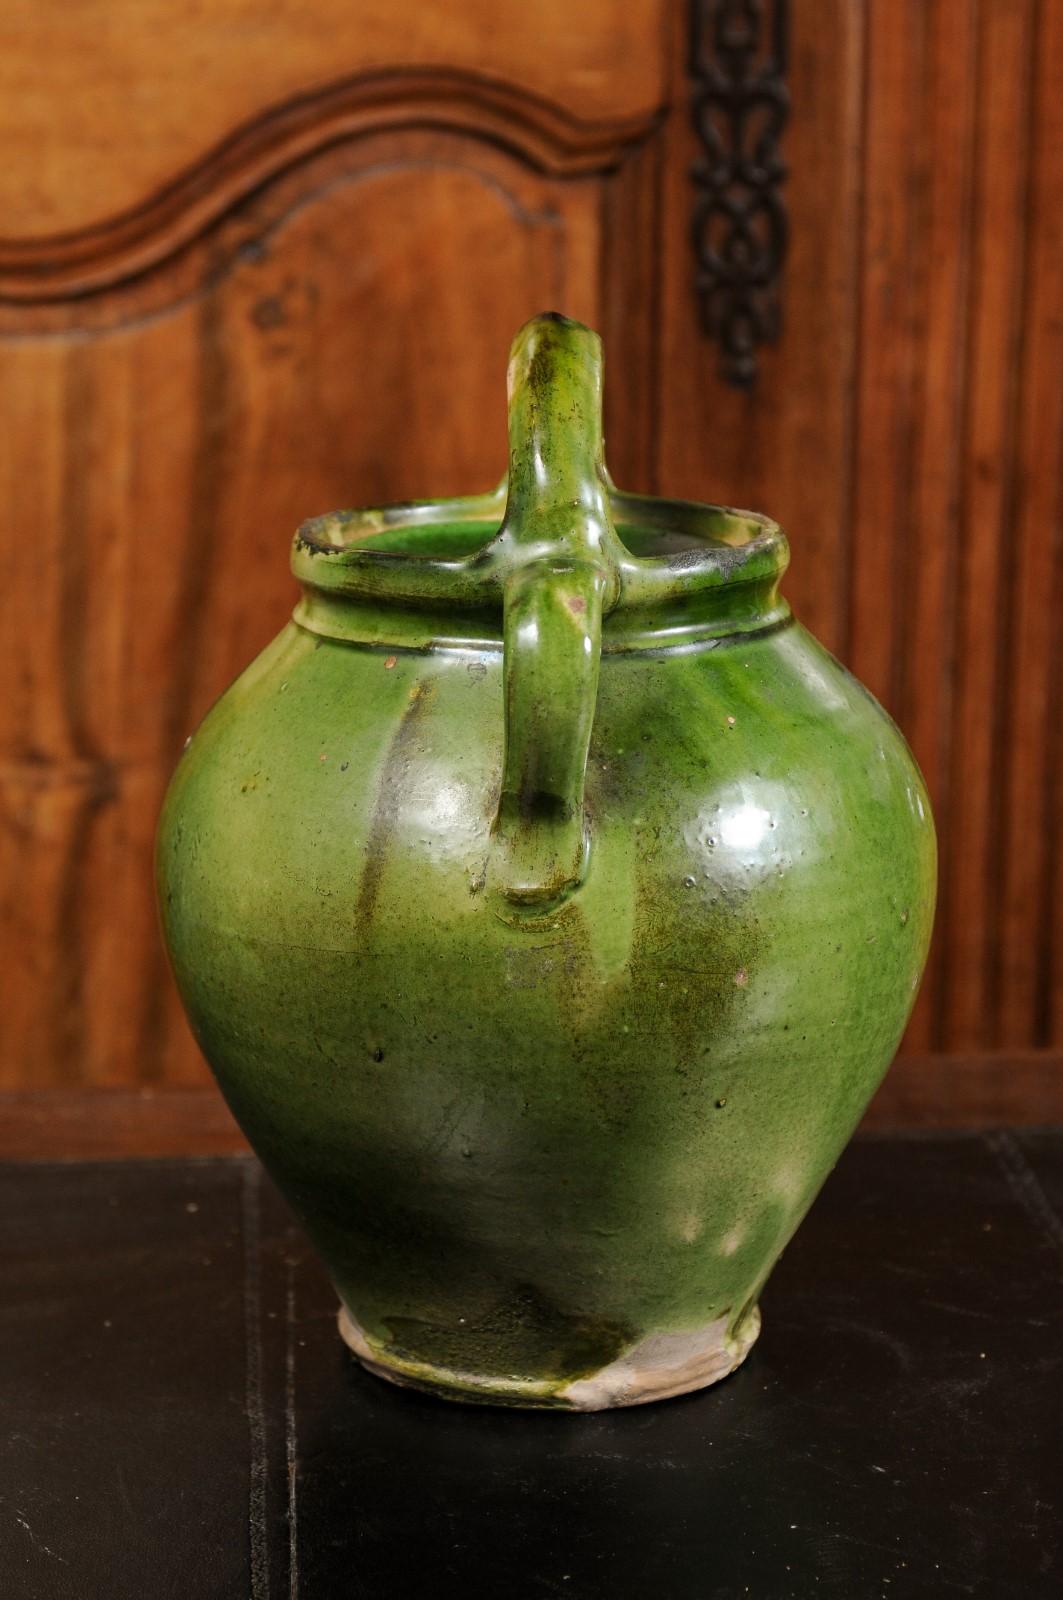 Pottery French Provincial 19th Century Green Glazed Olive Oil Jug with Weathered Patina